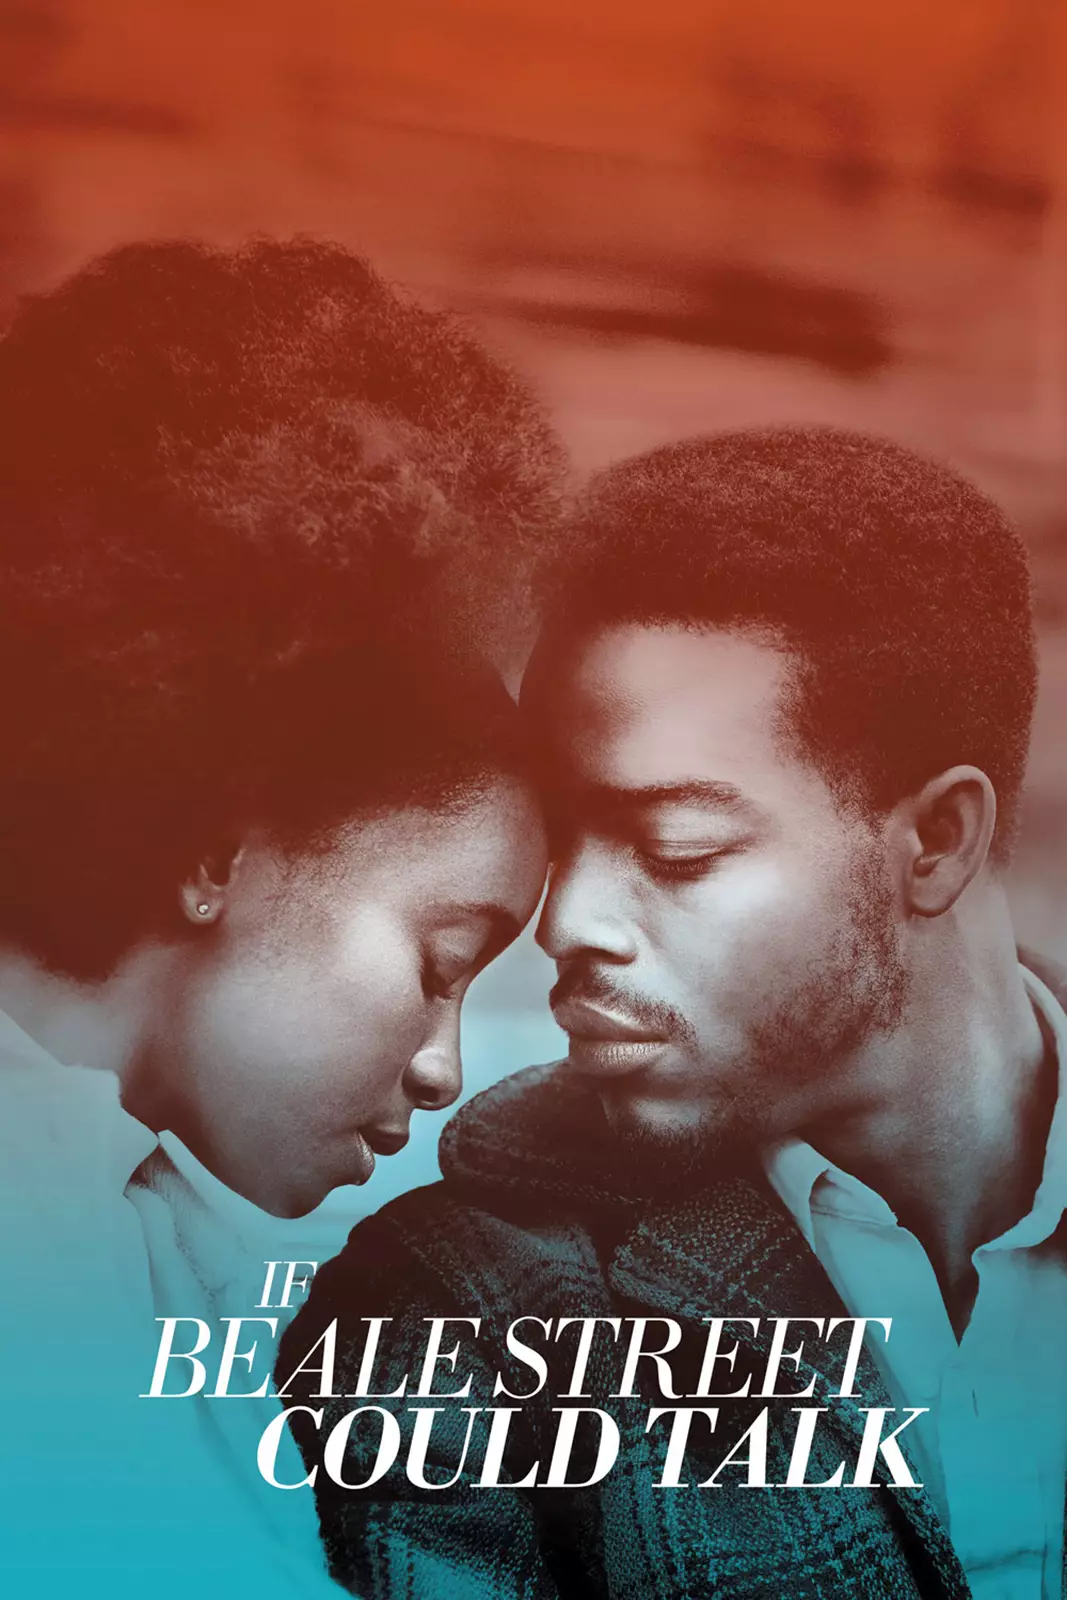 Theatrical Poster of the film "If Beale Street Could Talk" (2018) starring KiKi Layne and Stephan James.